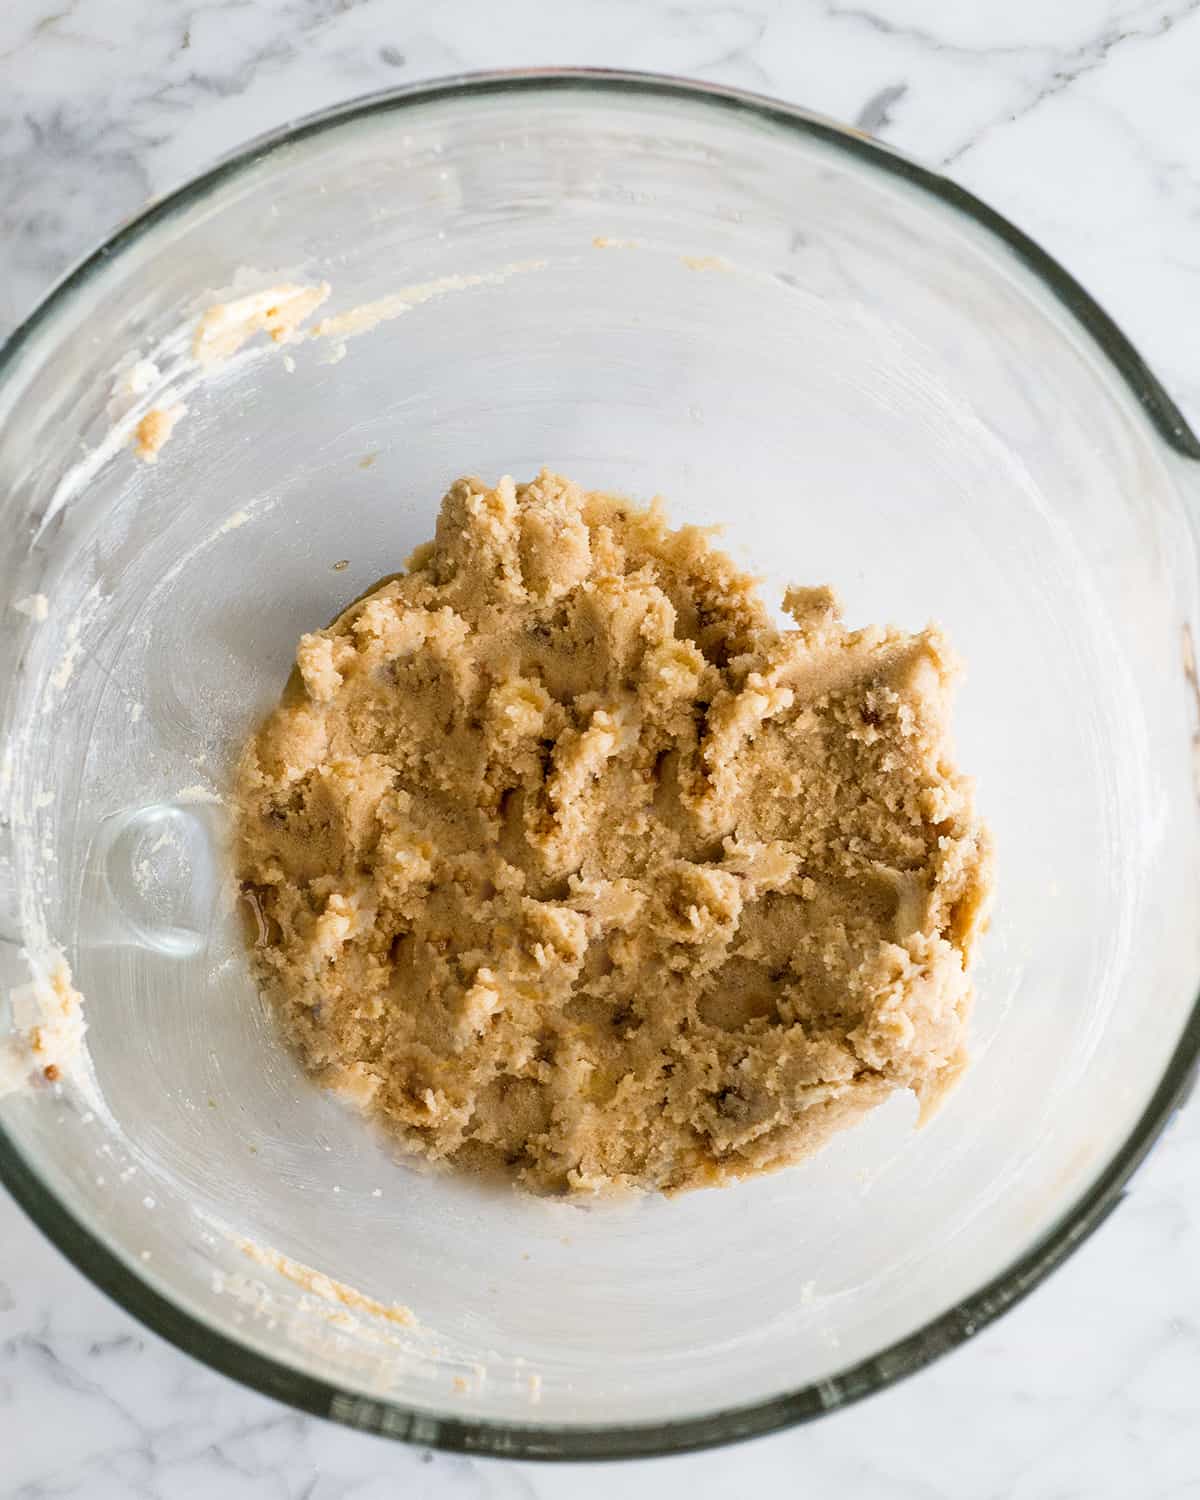 How to Make Oatmeal Cookies - butter & sugars in a bowl after creaming